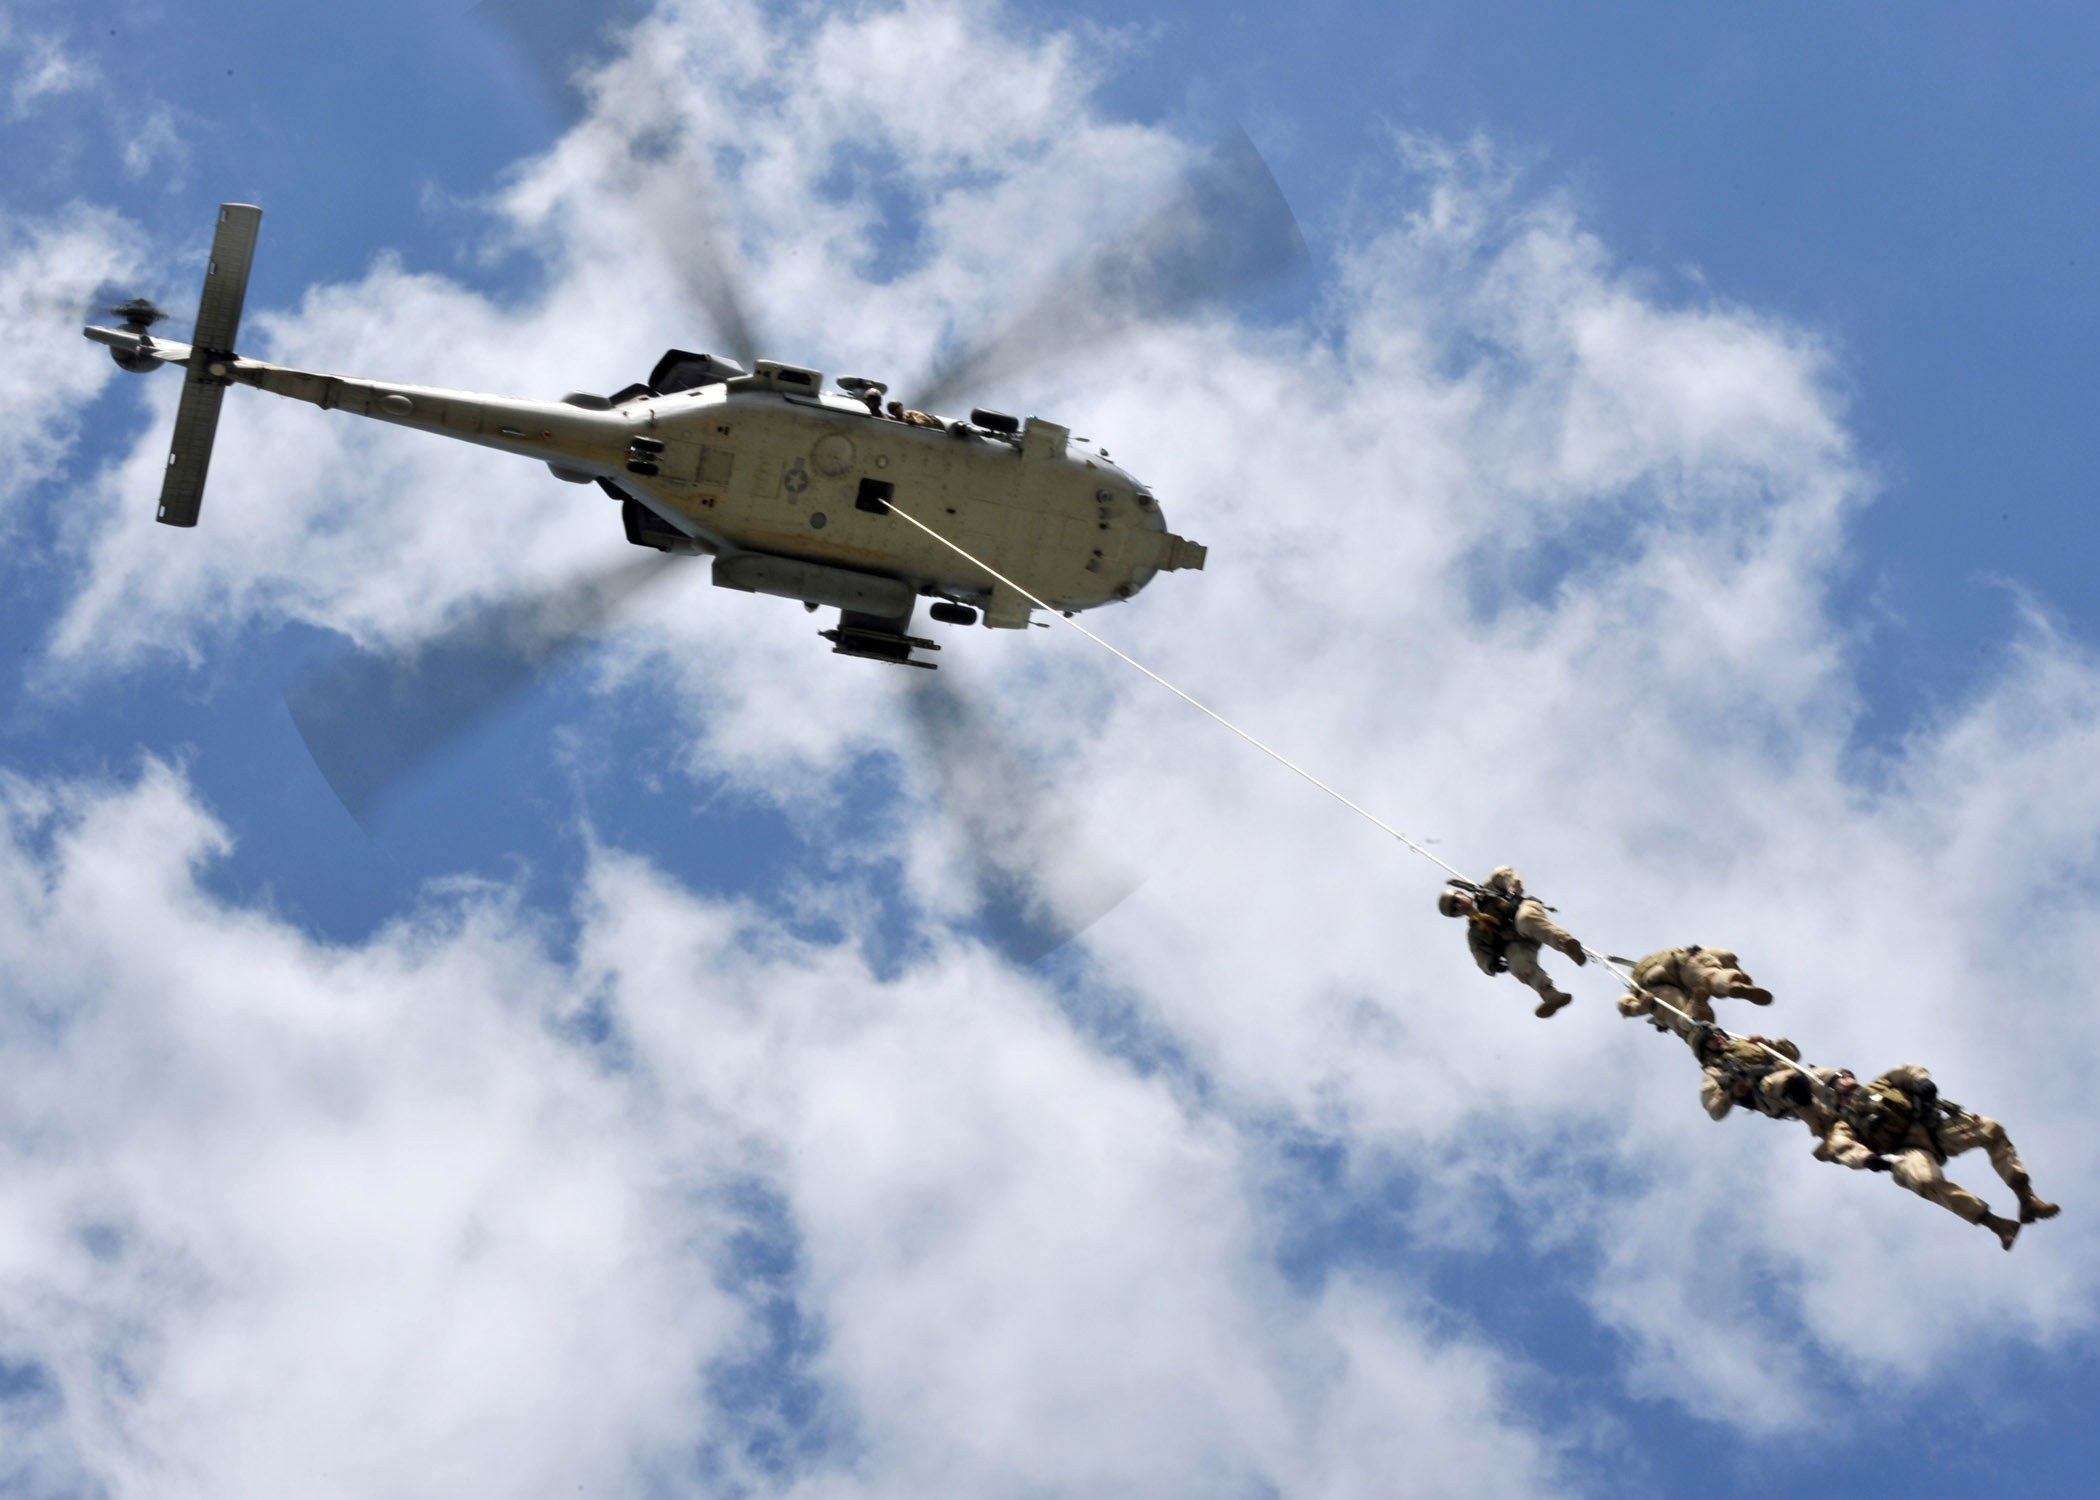 Navy SEALs - Special Patrol Insertion & Extraction System (SPIES)